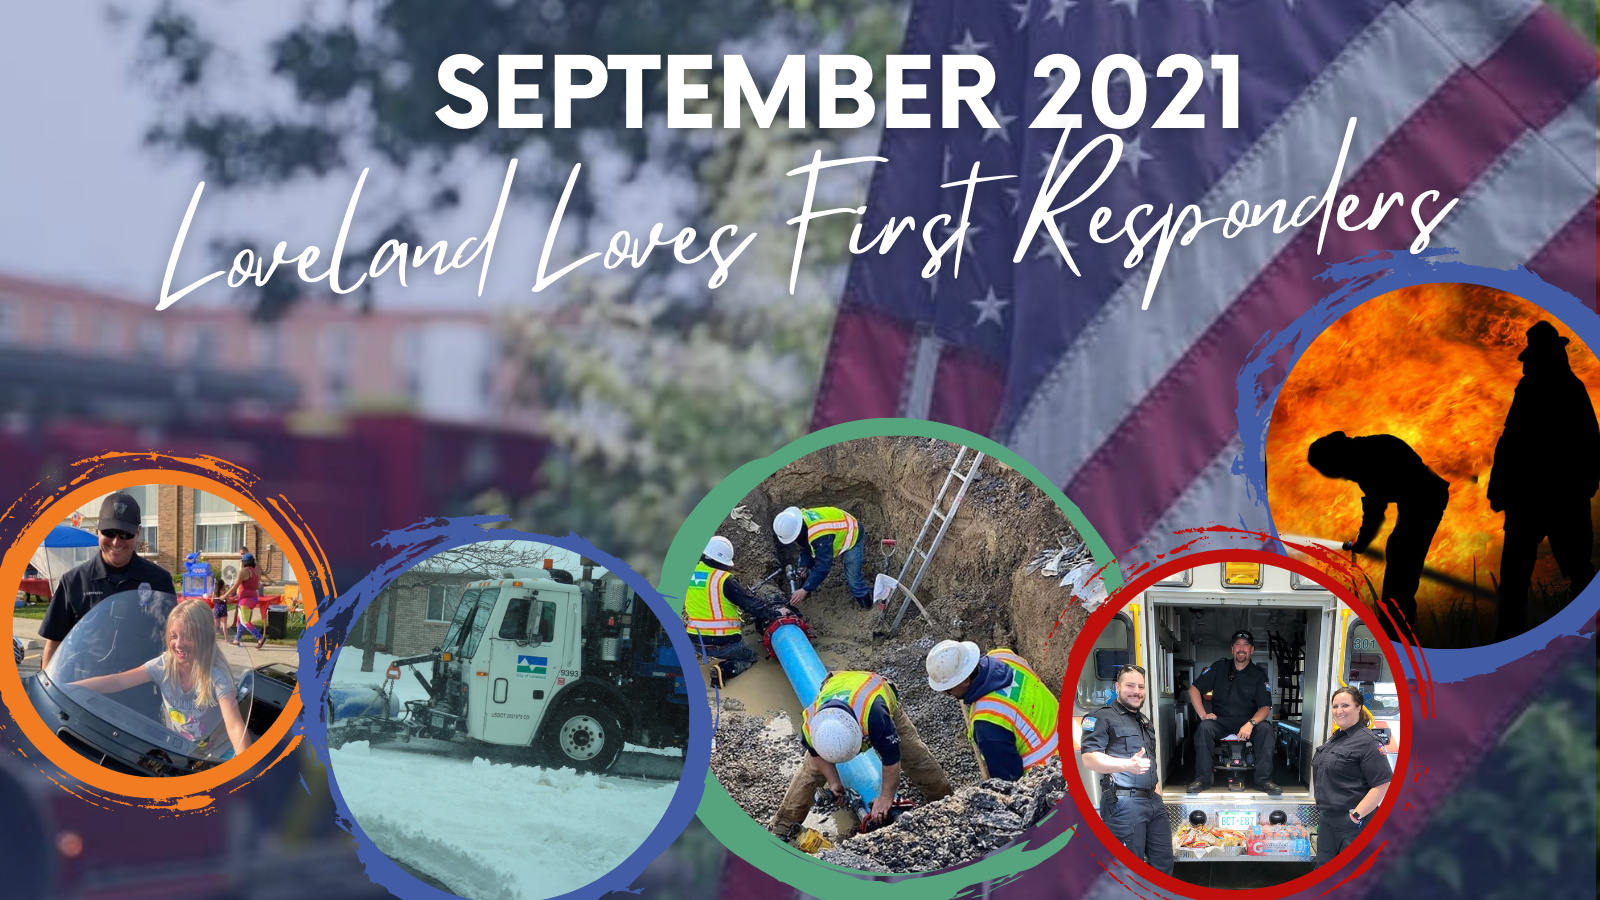 Did you know that September is Loveland Loves First Responders month? ️